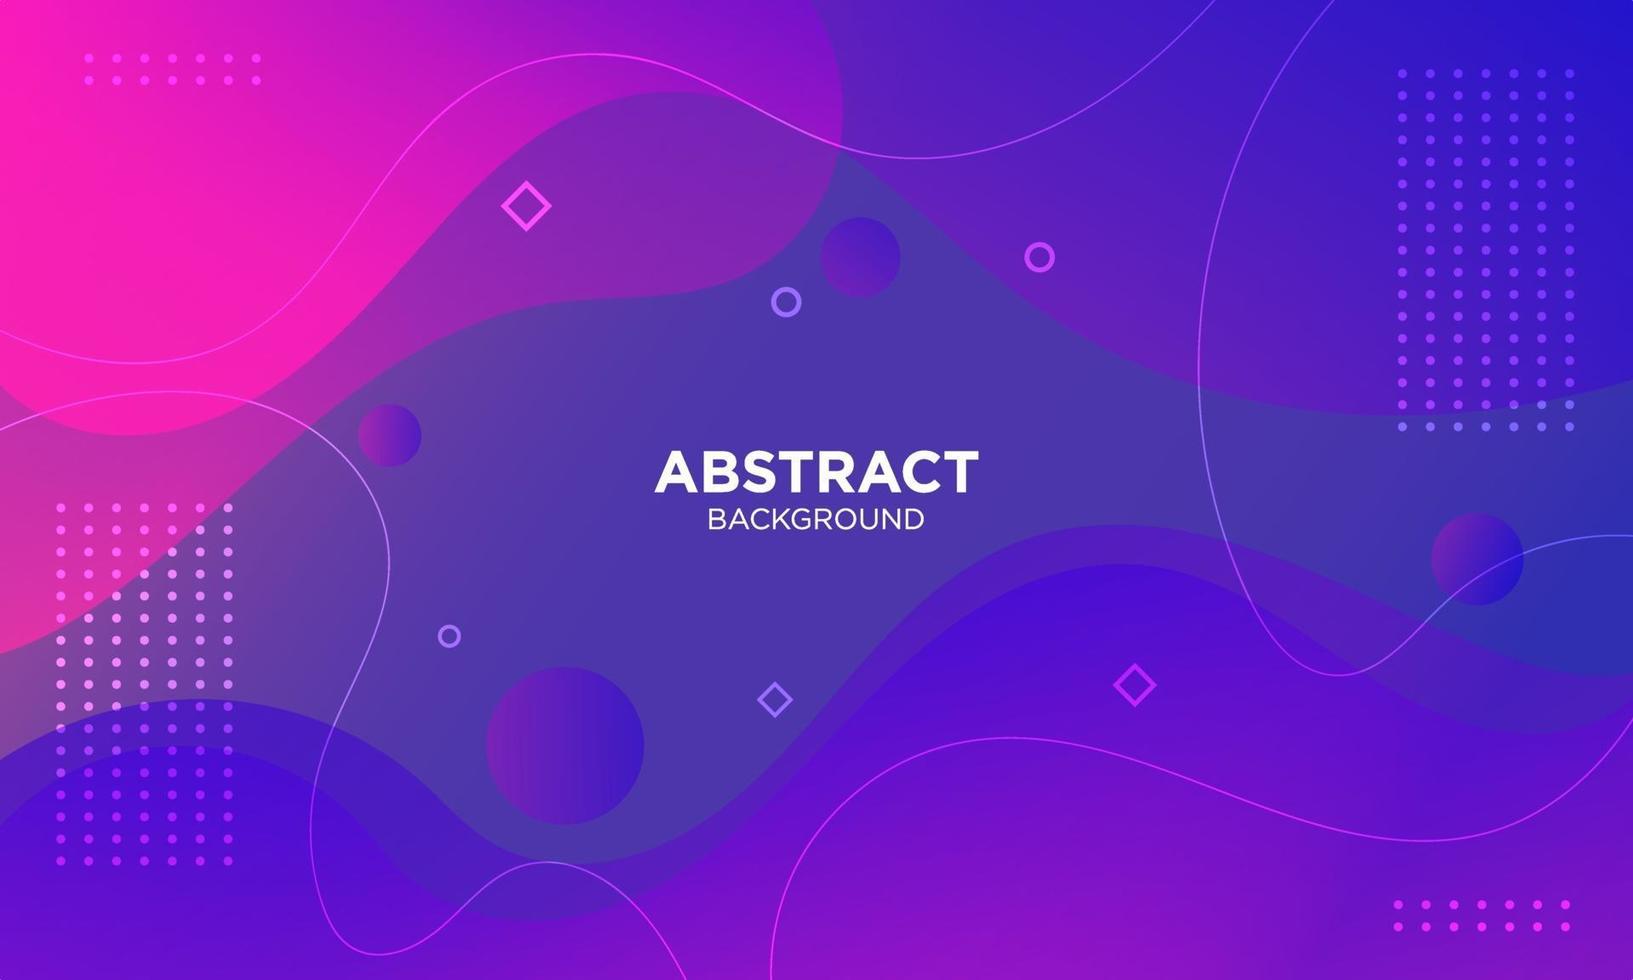 Abstract Colorful Fluid Wave Background vector